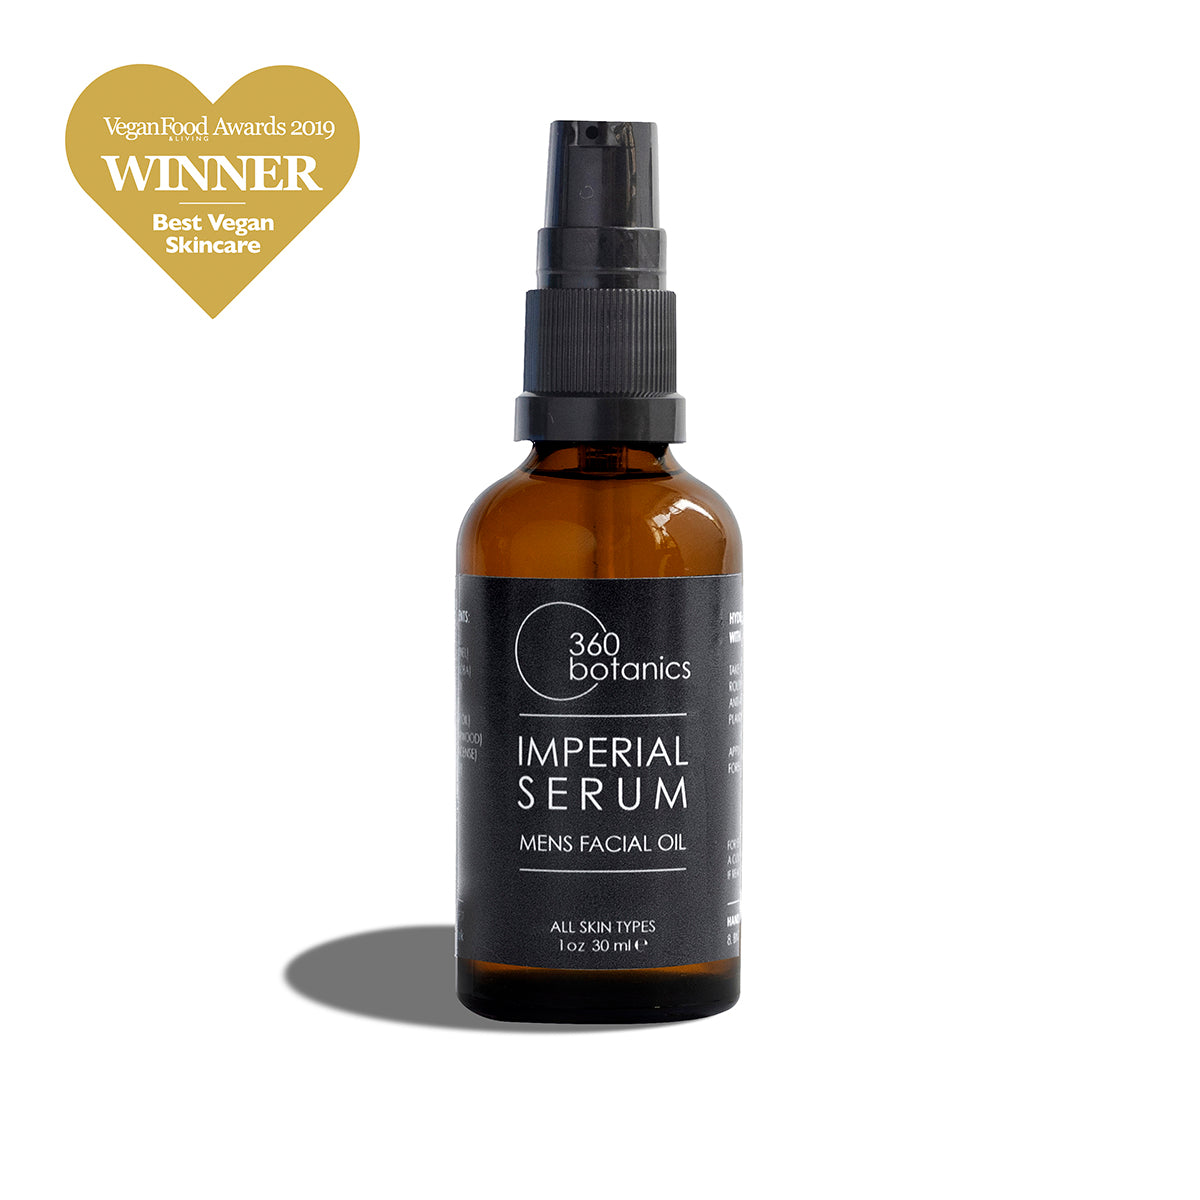 360 Botanics Imperial Serum Men's Facial Oil in a 30 ml amber glass bottle with a spray nozzle, against a white background. A golden badge at the top left corner announces 'Vegan Food Awards 2019 WINNER Best Vegan Skincare,' highlighting the product's accolade and vegan-friendly credentials